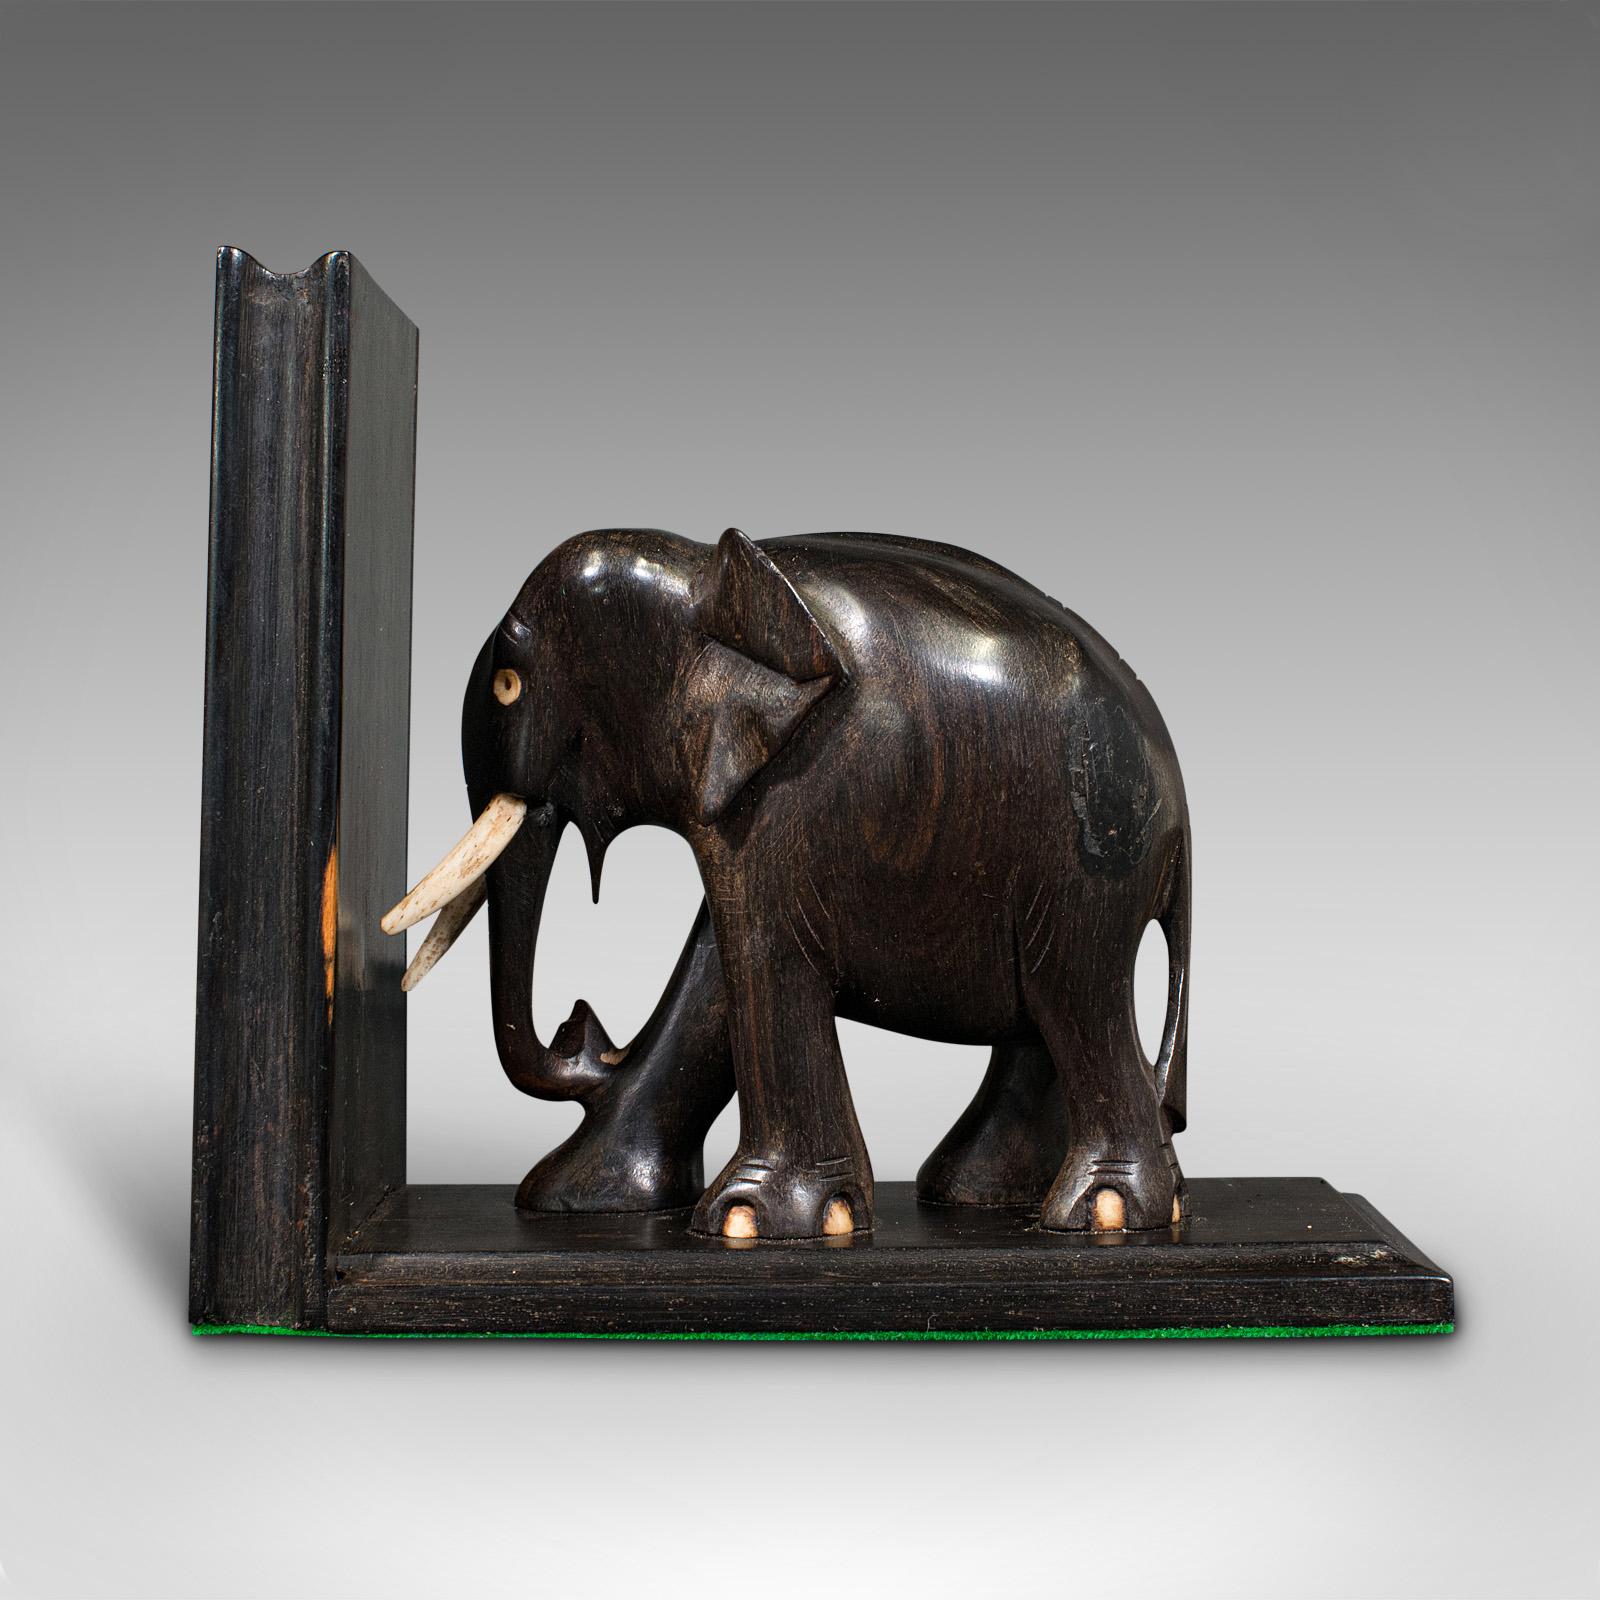 19th Century Pair of Small Antique Elephant Bookends, Anglo Indian, Ebony, Victorian, C.1890 For Sale